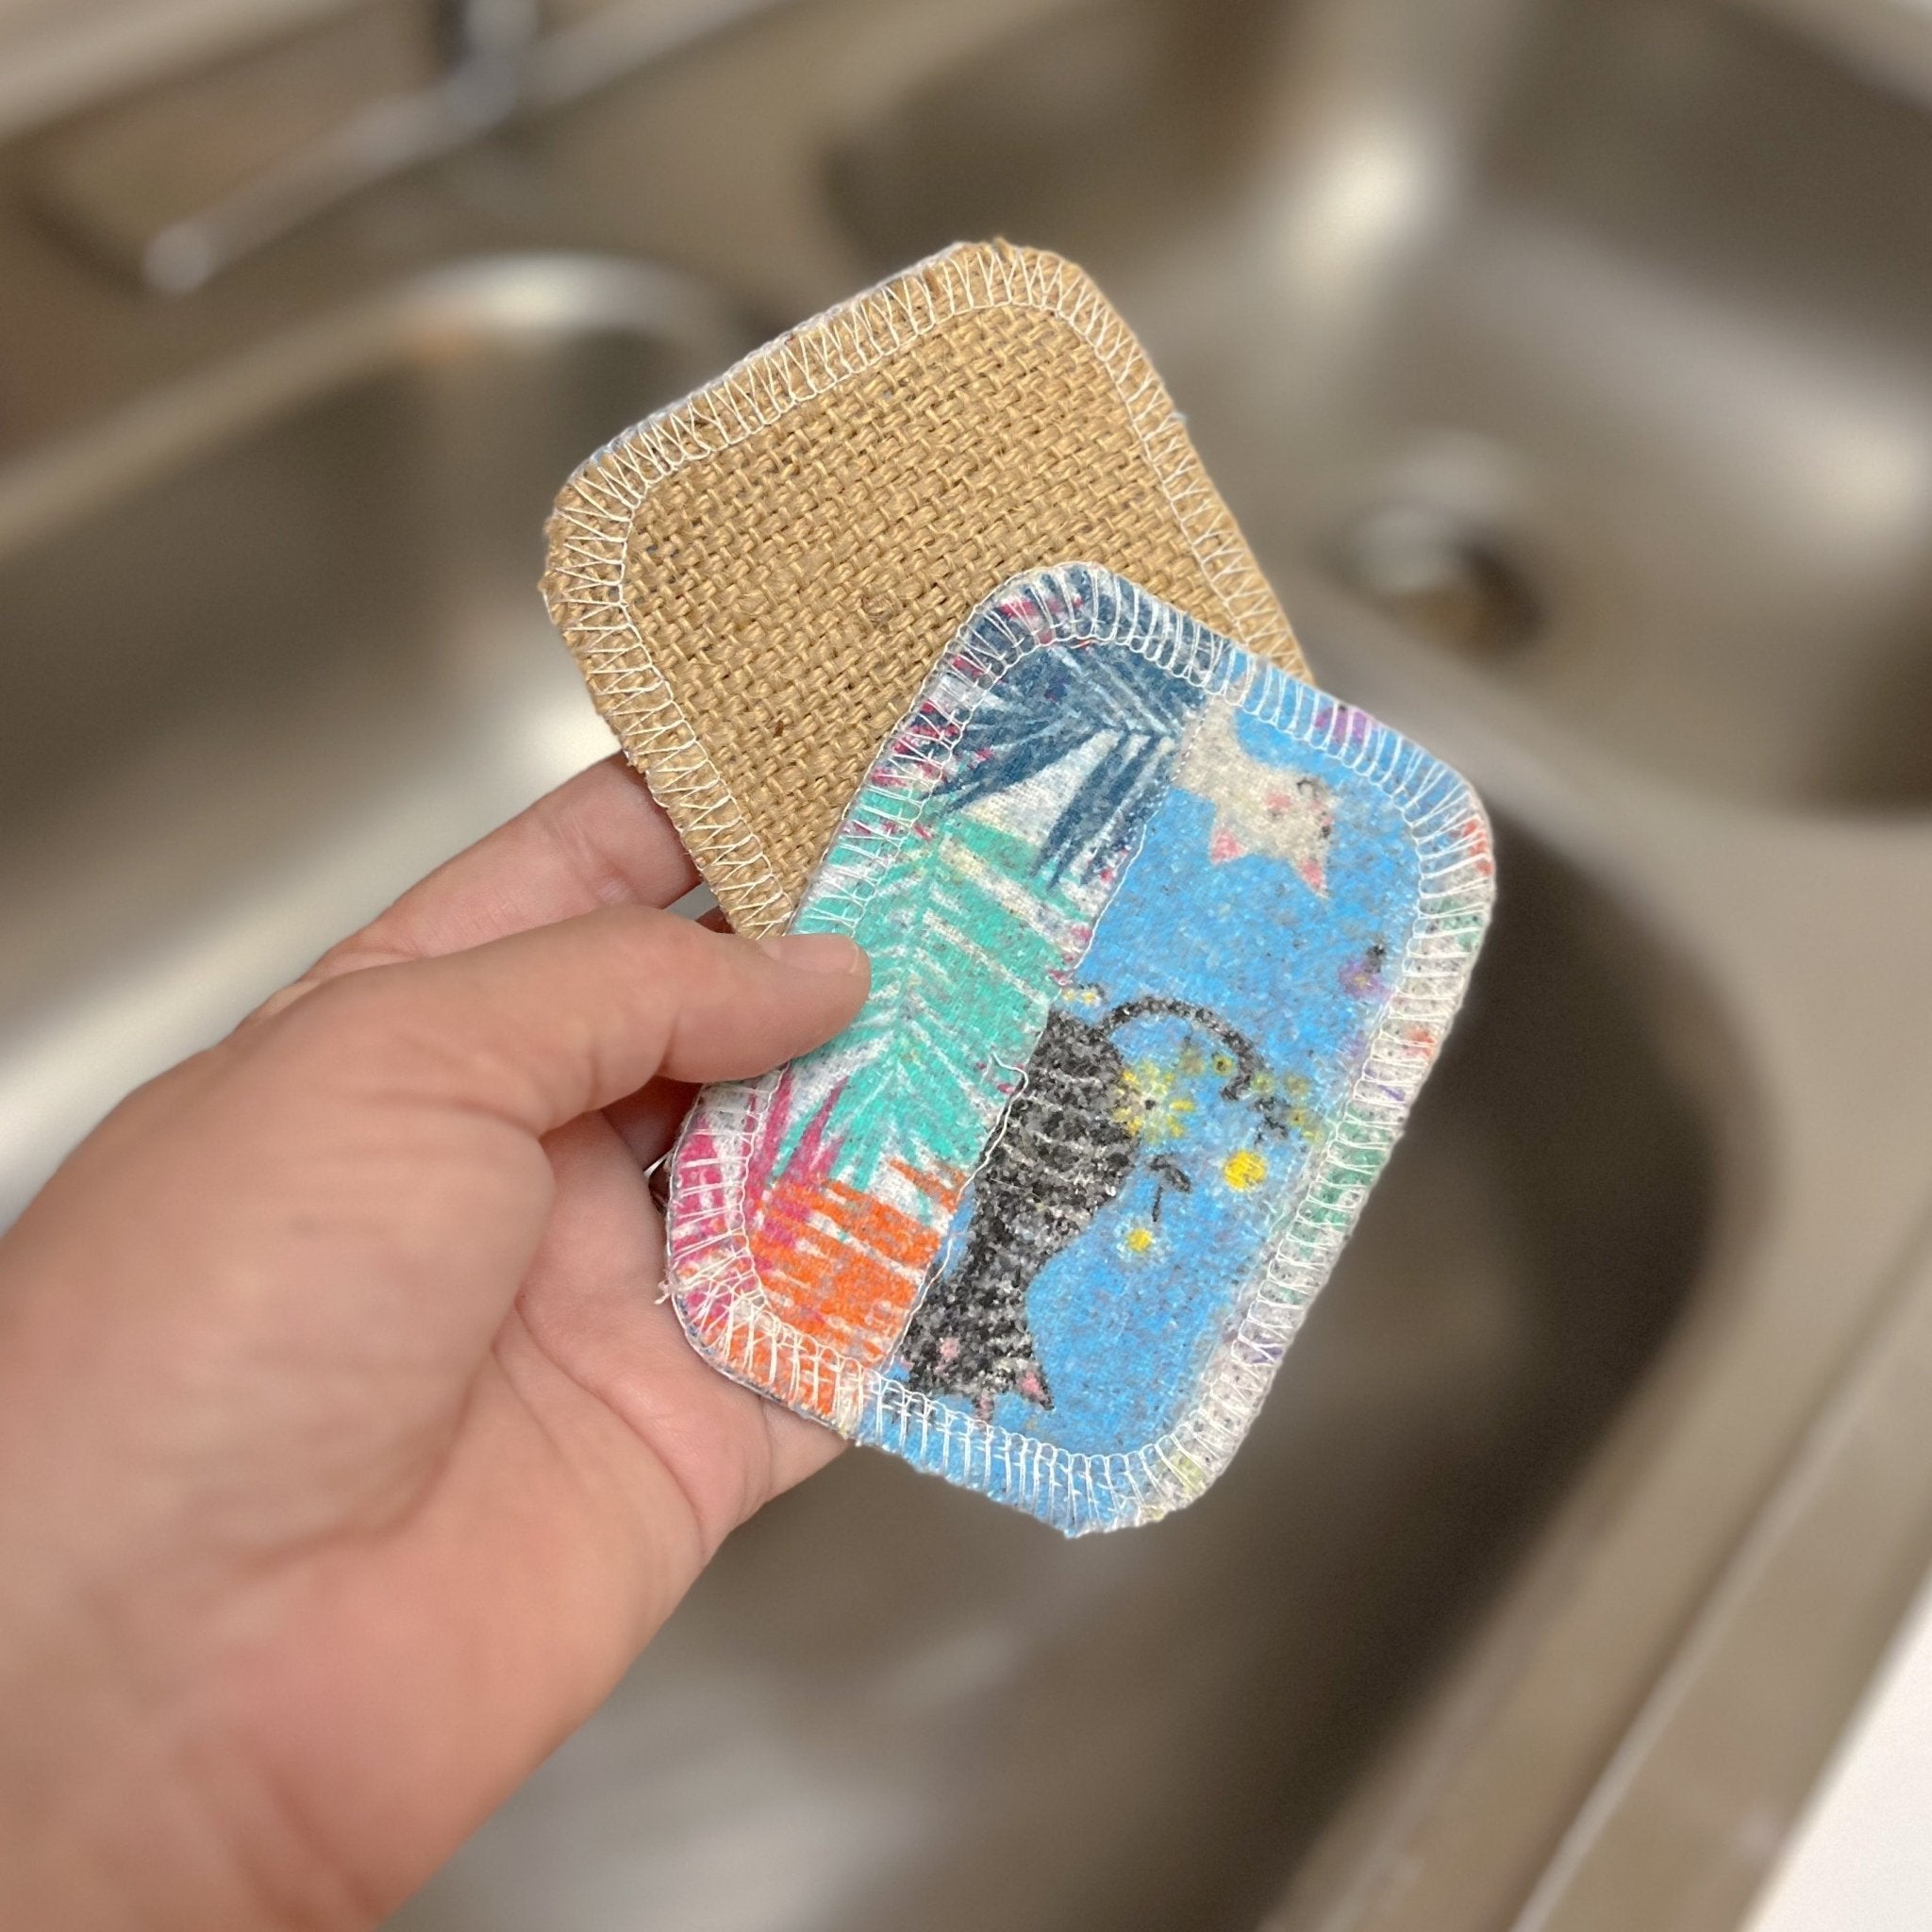 Martelli mat scrubbers are a fantastic tool to clean your mat! Purchase at  The Sewing House! 